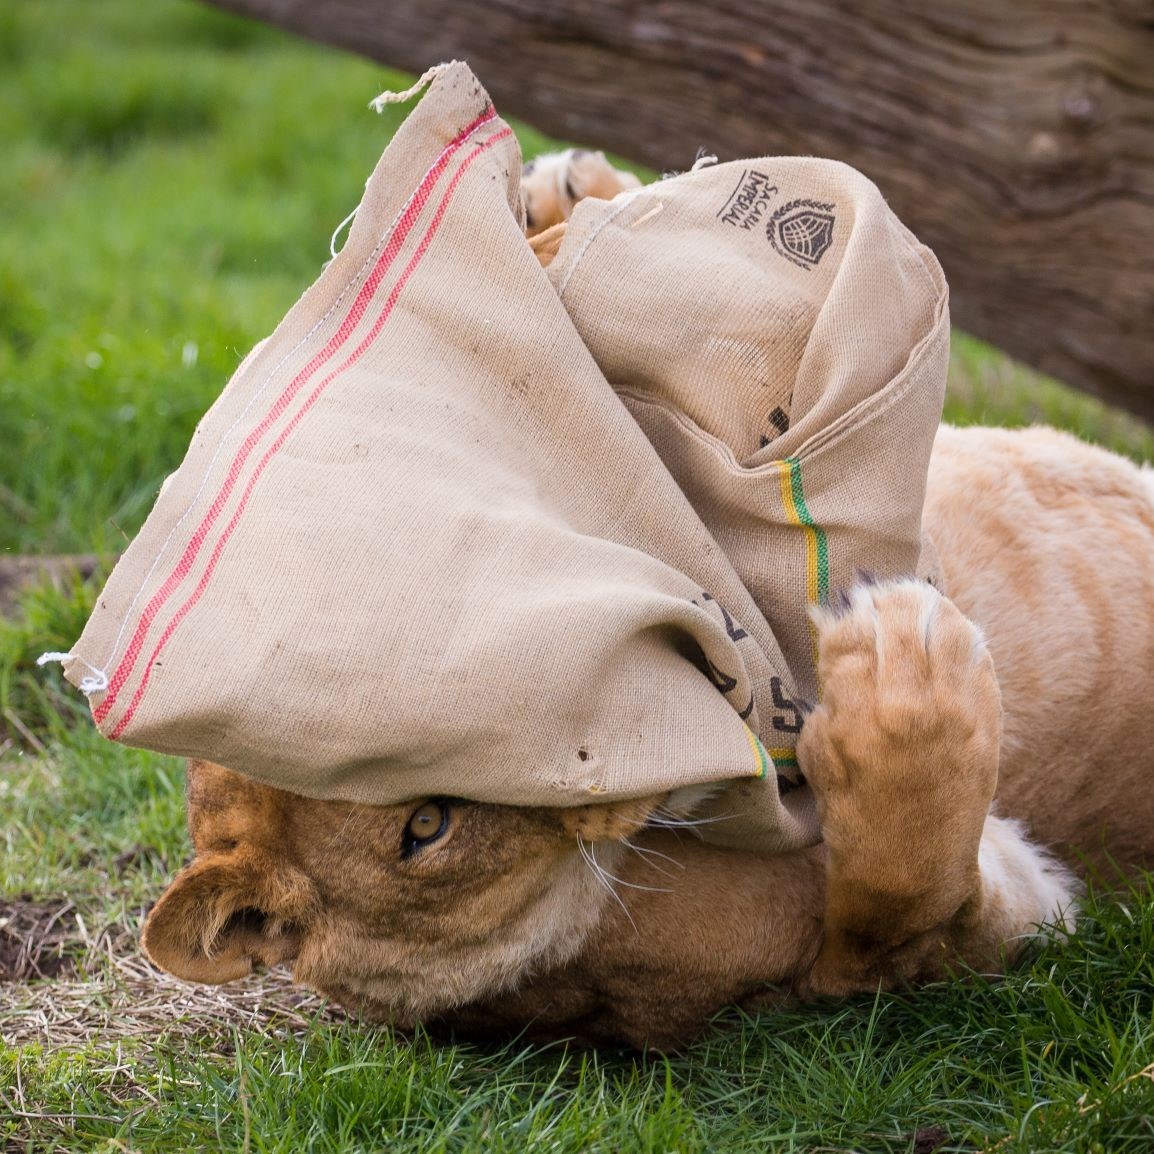 African Lioness plays with and peeks out from behind brown sack 